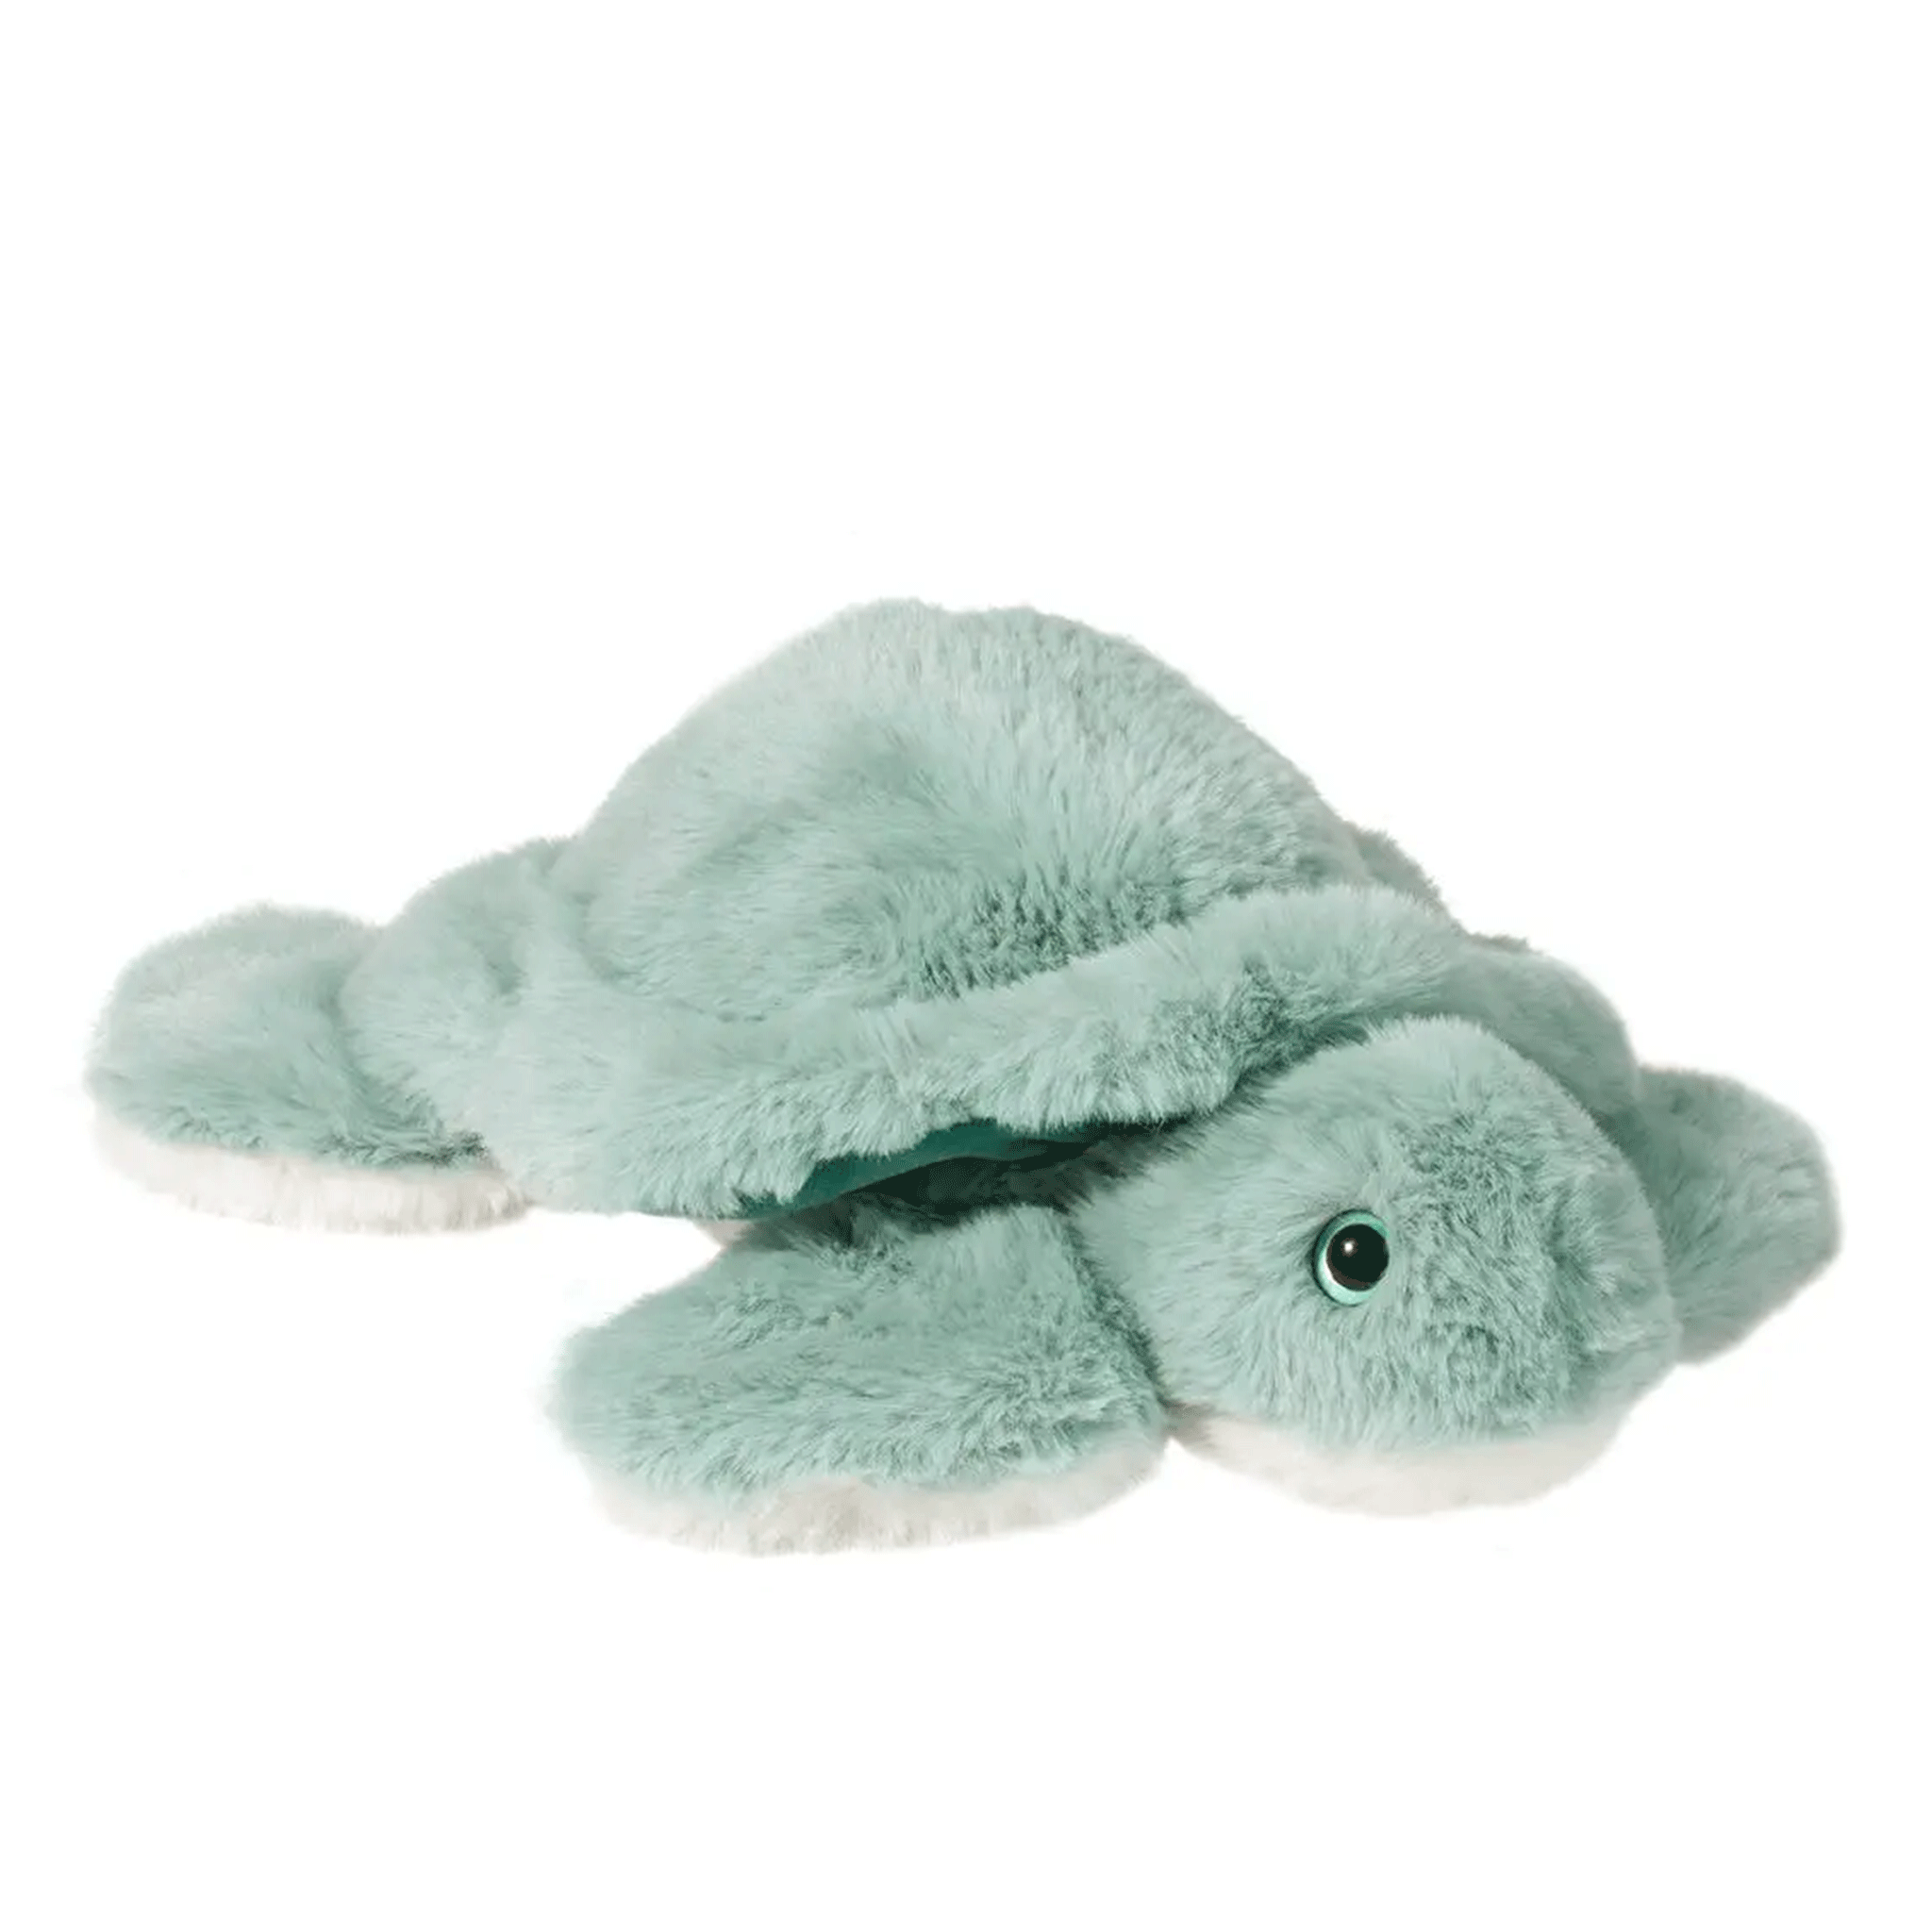 On a white background is a aqua blue colored fuzzy turtle stuffed animal. 